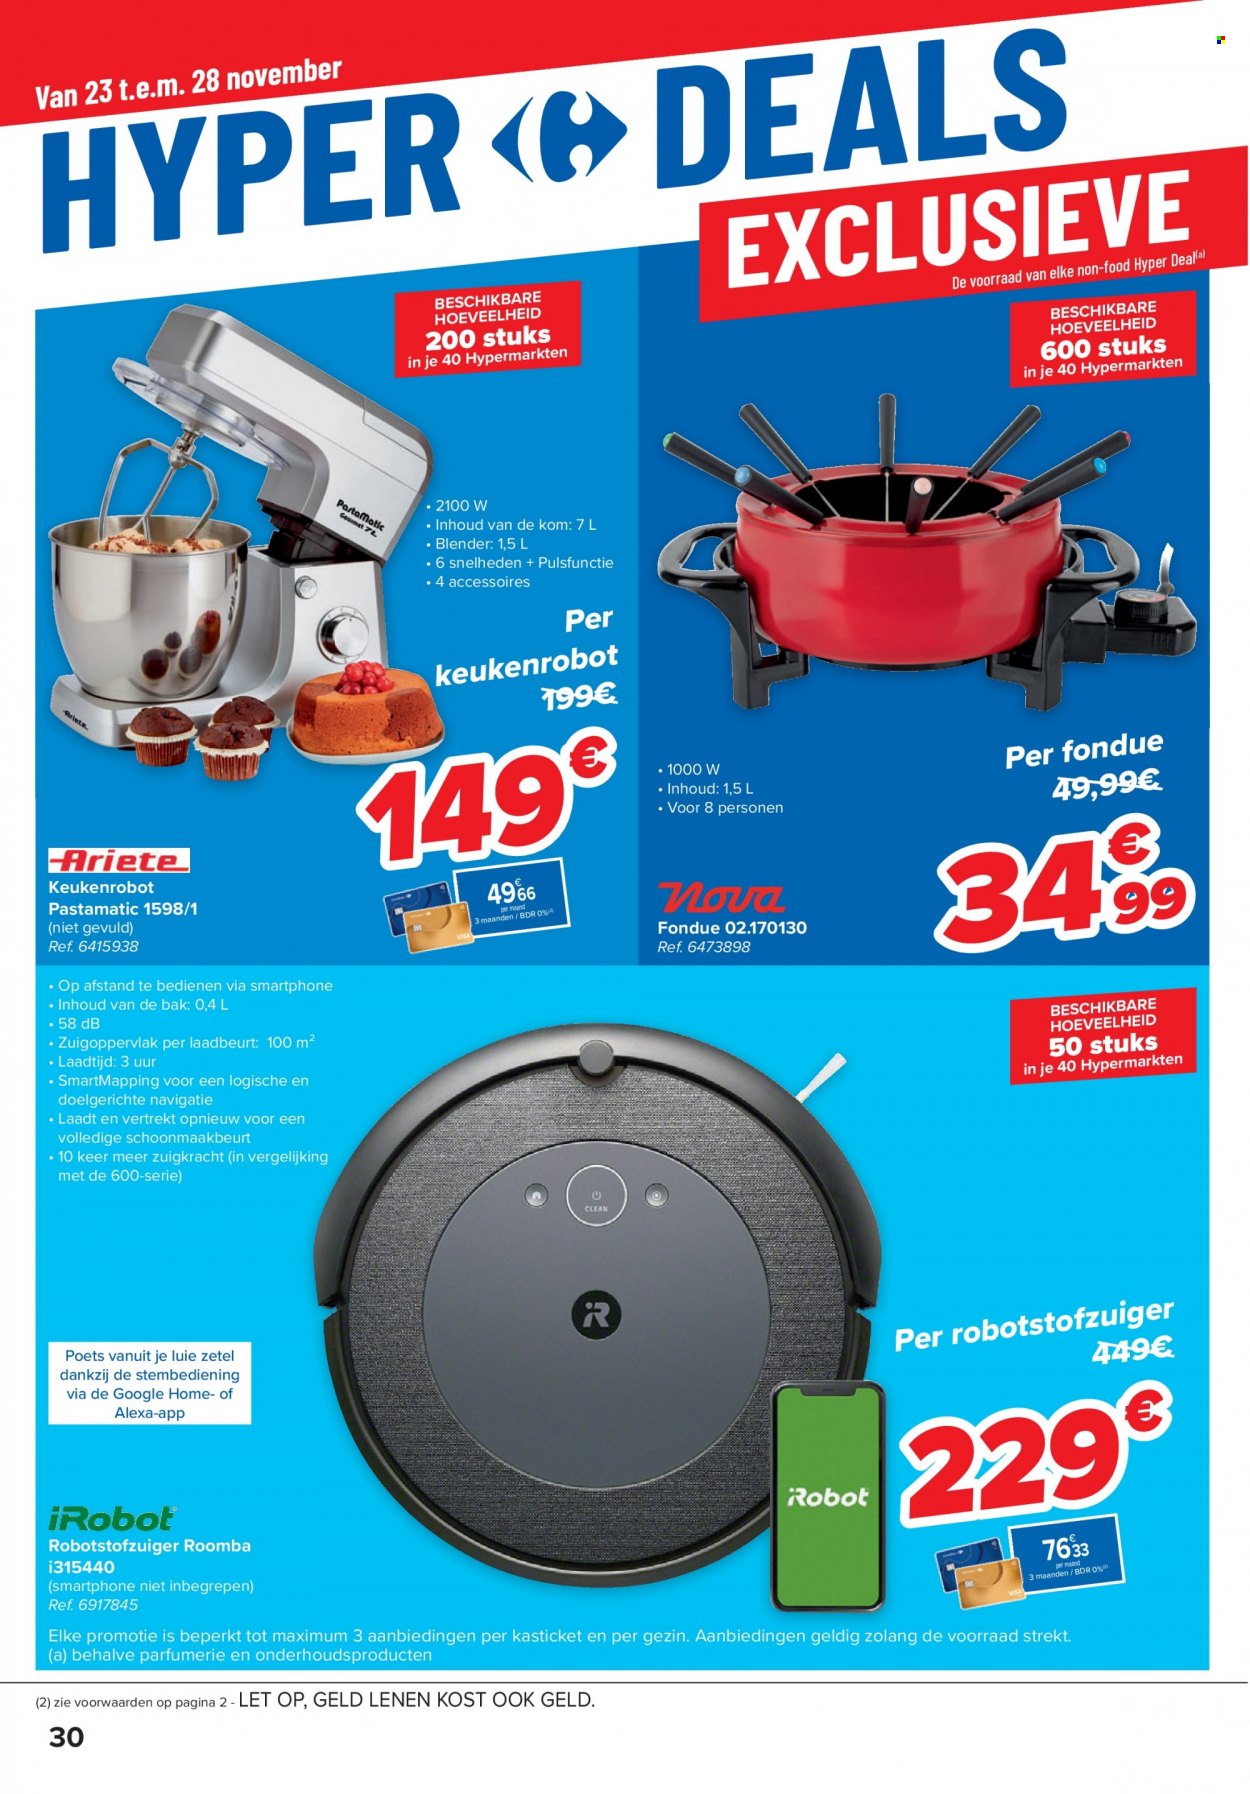 Catalogue Carrefour hypermarkt - 23.11.2022 - 5.12.2022. Page 30.